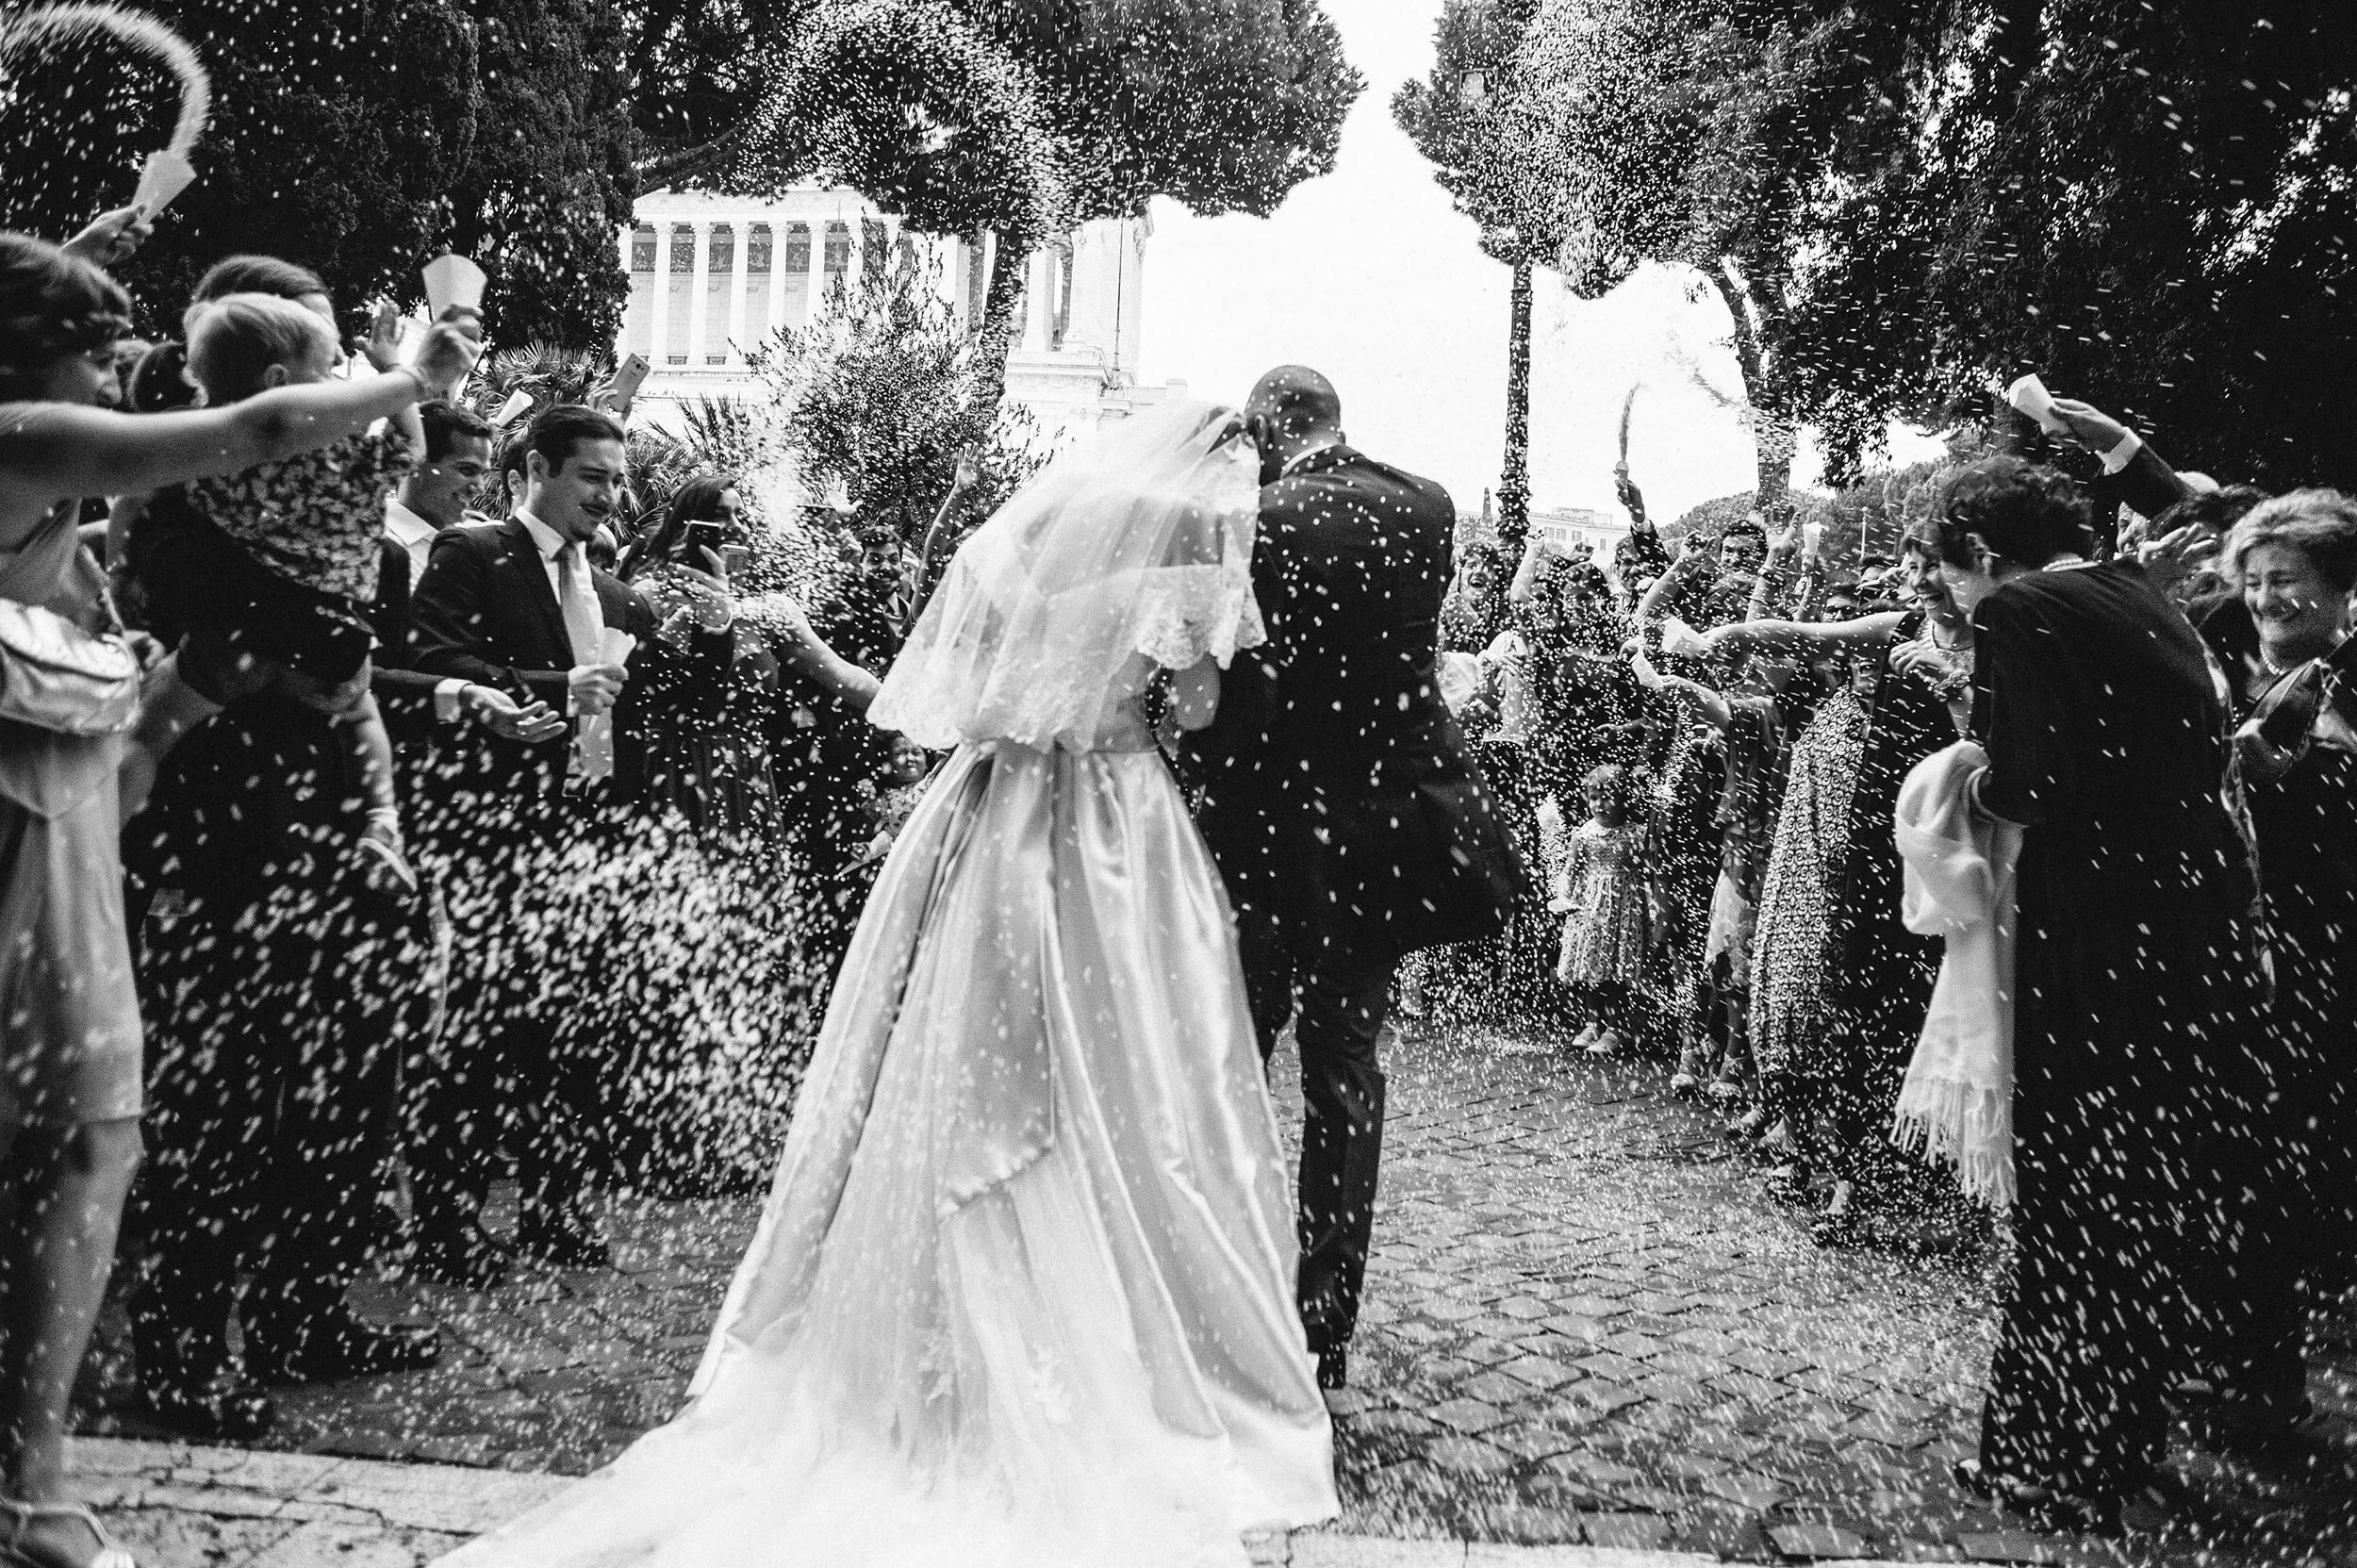 confetti-rice-outside-the-church-rome-san-marco-black-and-white-wedding-photography.jpg